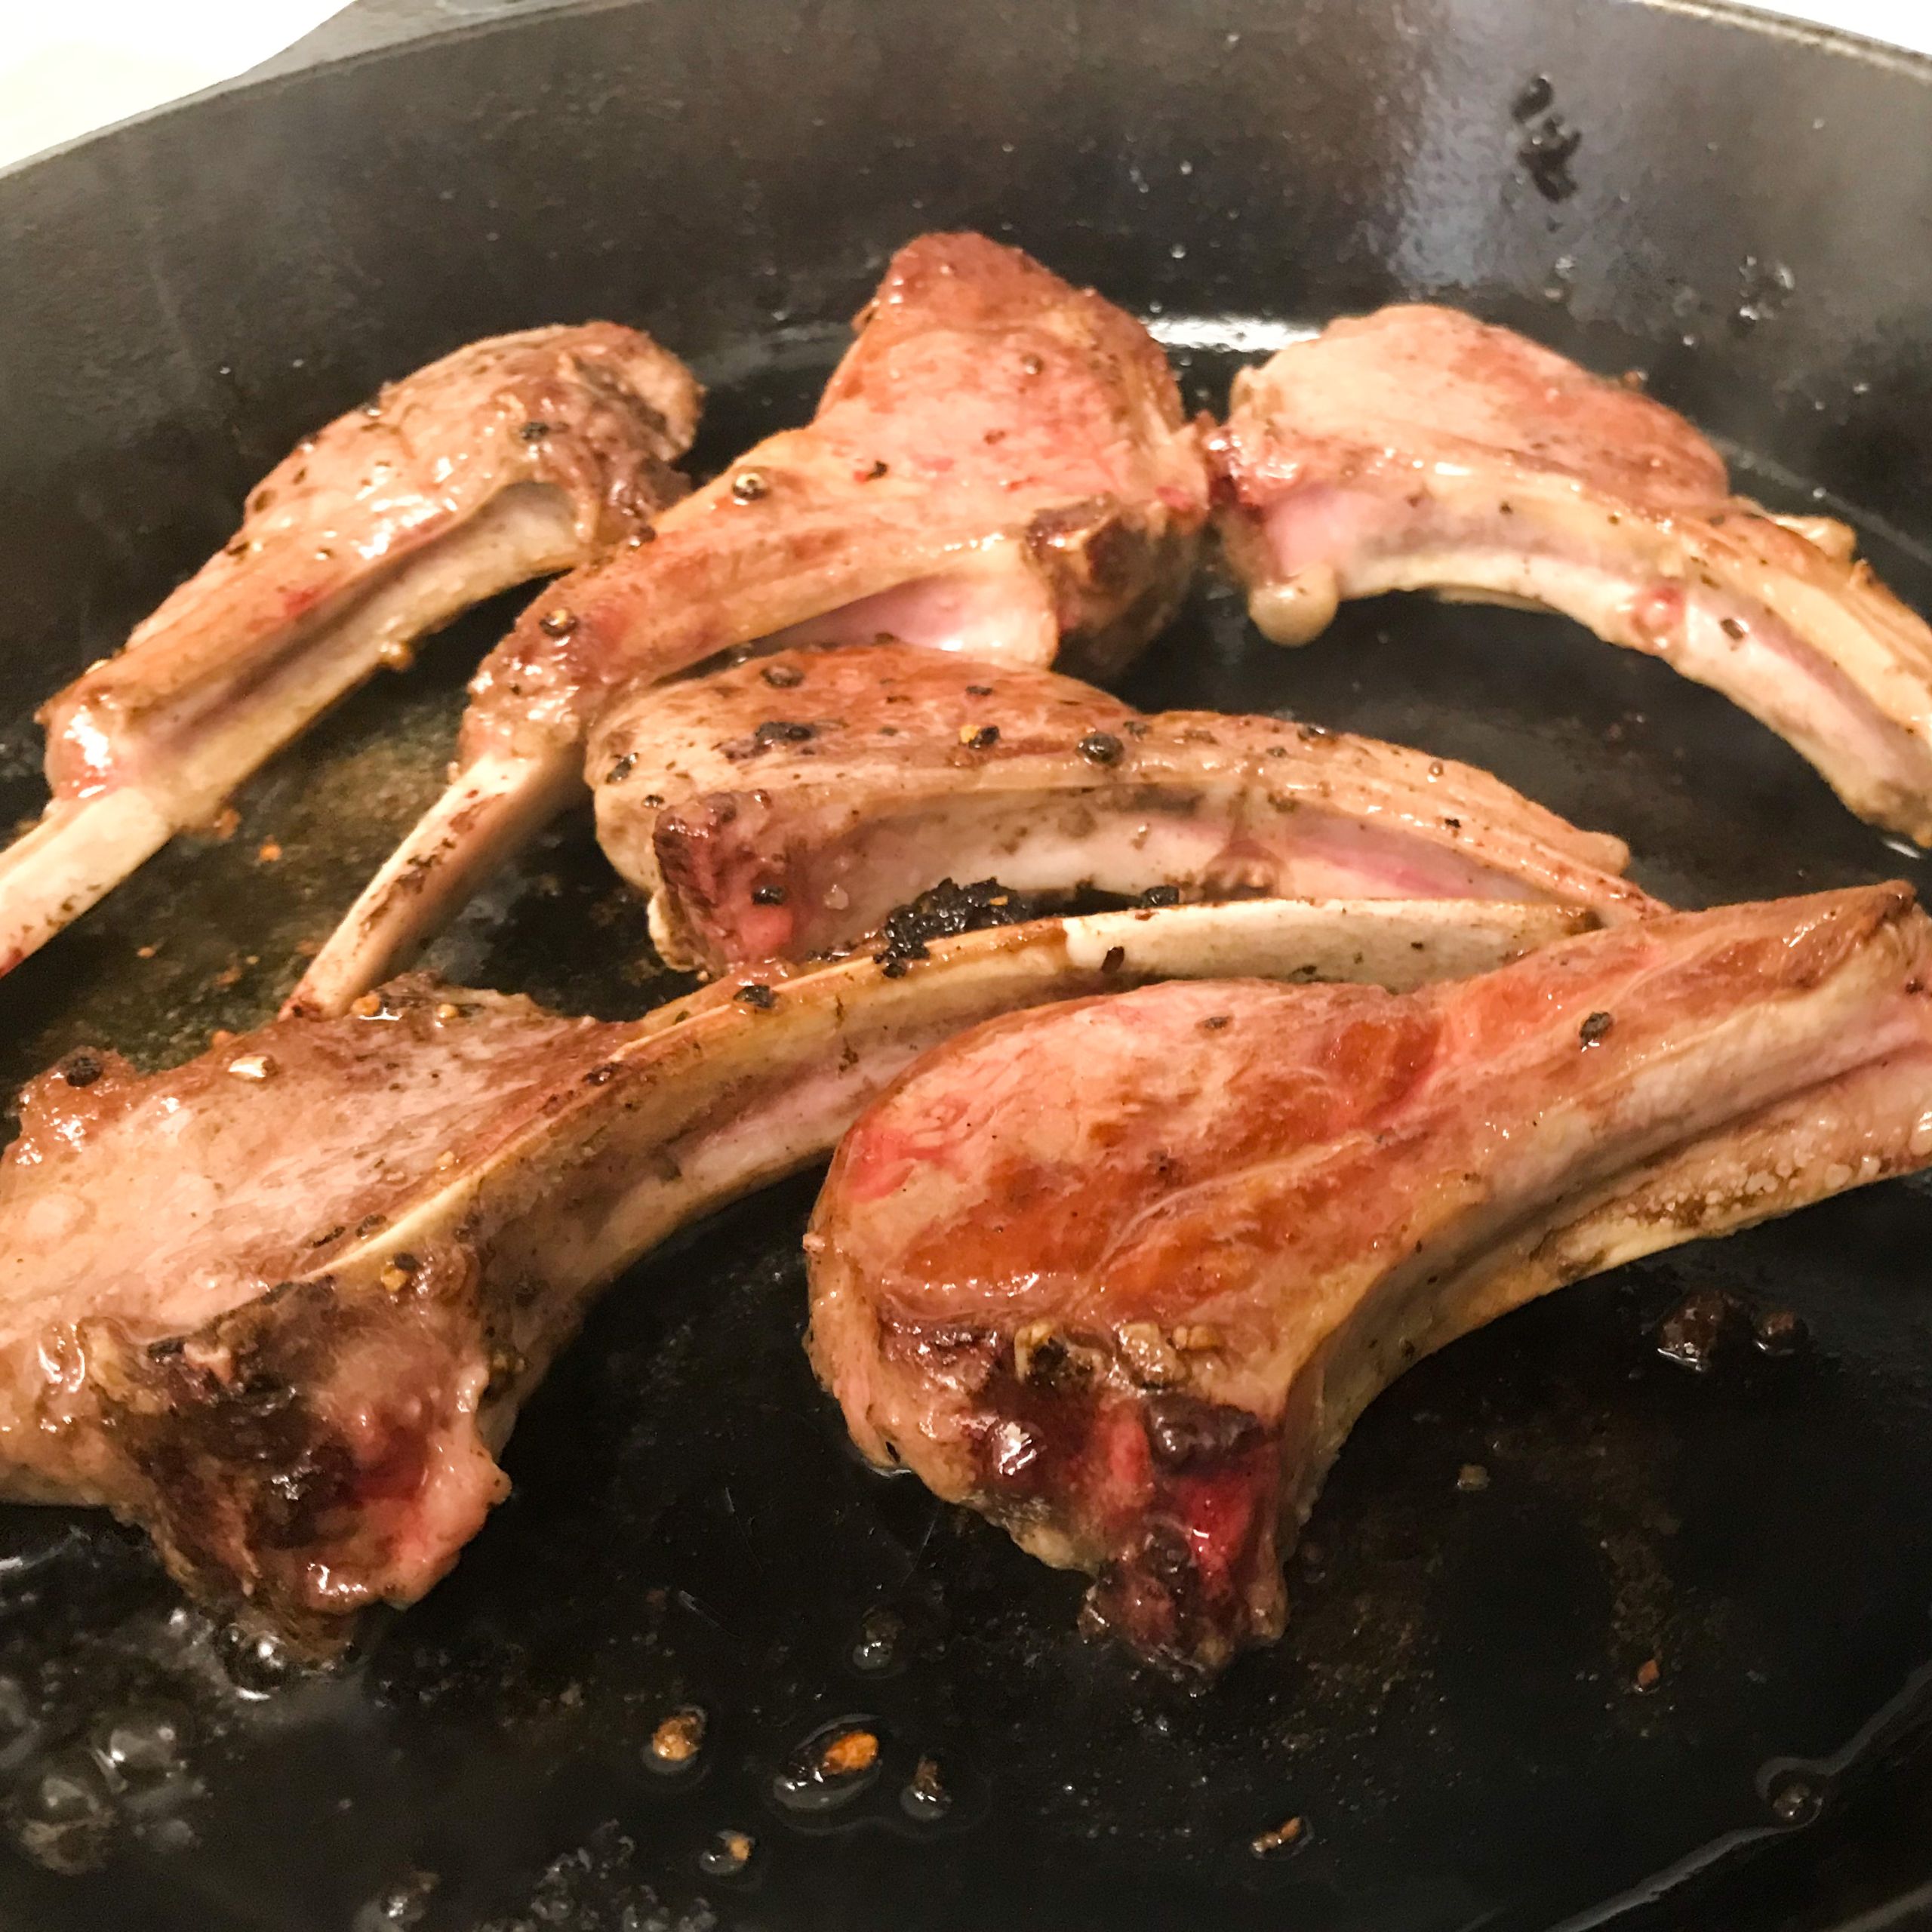 COOKED LAMB CHOPS IN SKILLET | MY CURATED TASTES